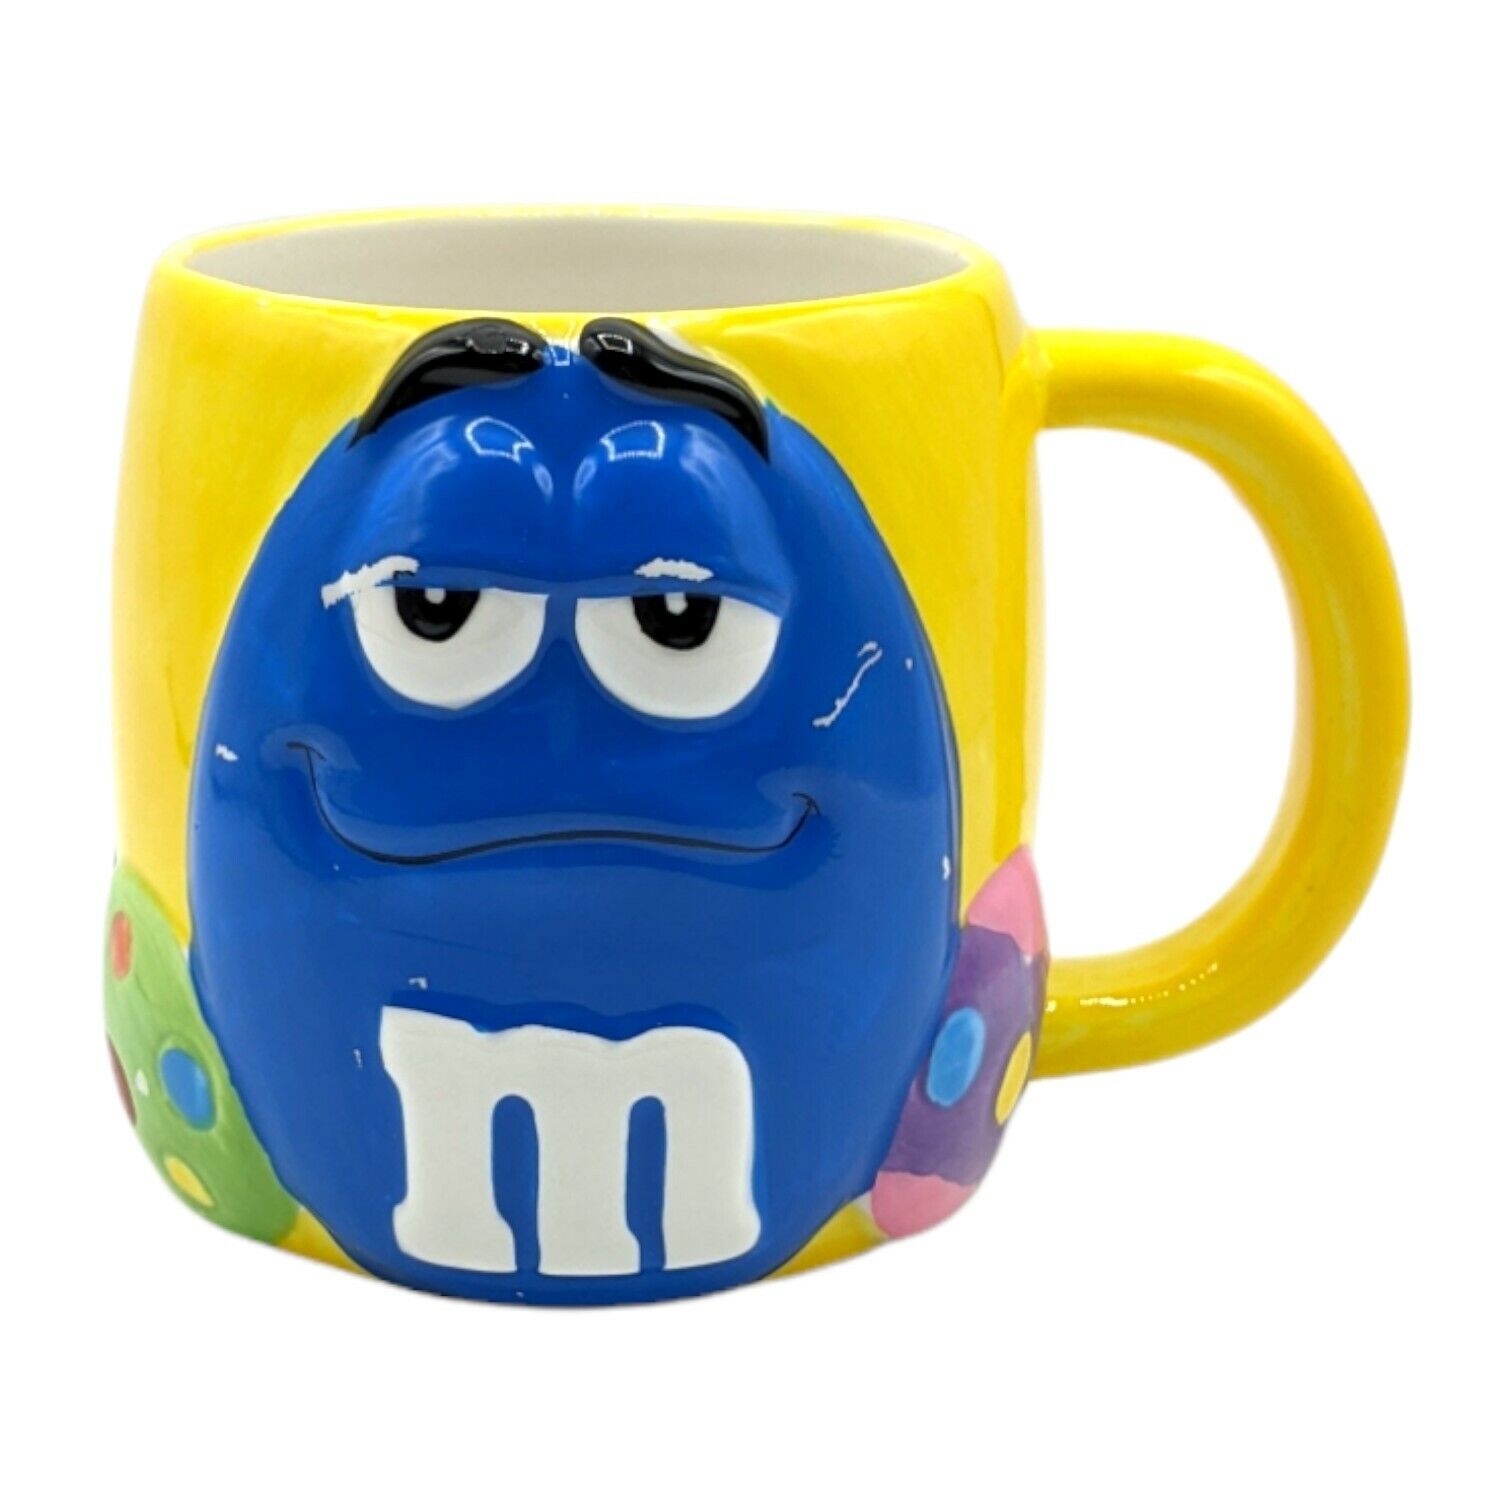 M&Ms Easter Eggs Ceramic Mug 2001 Blue on Yellow Cup Galerie Large READ